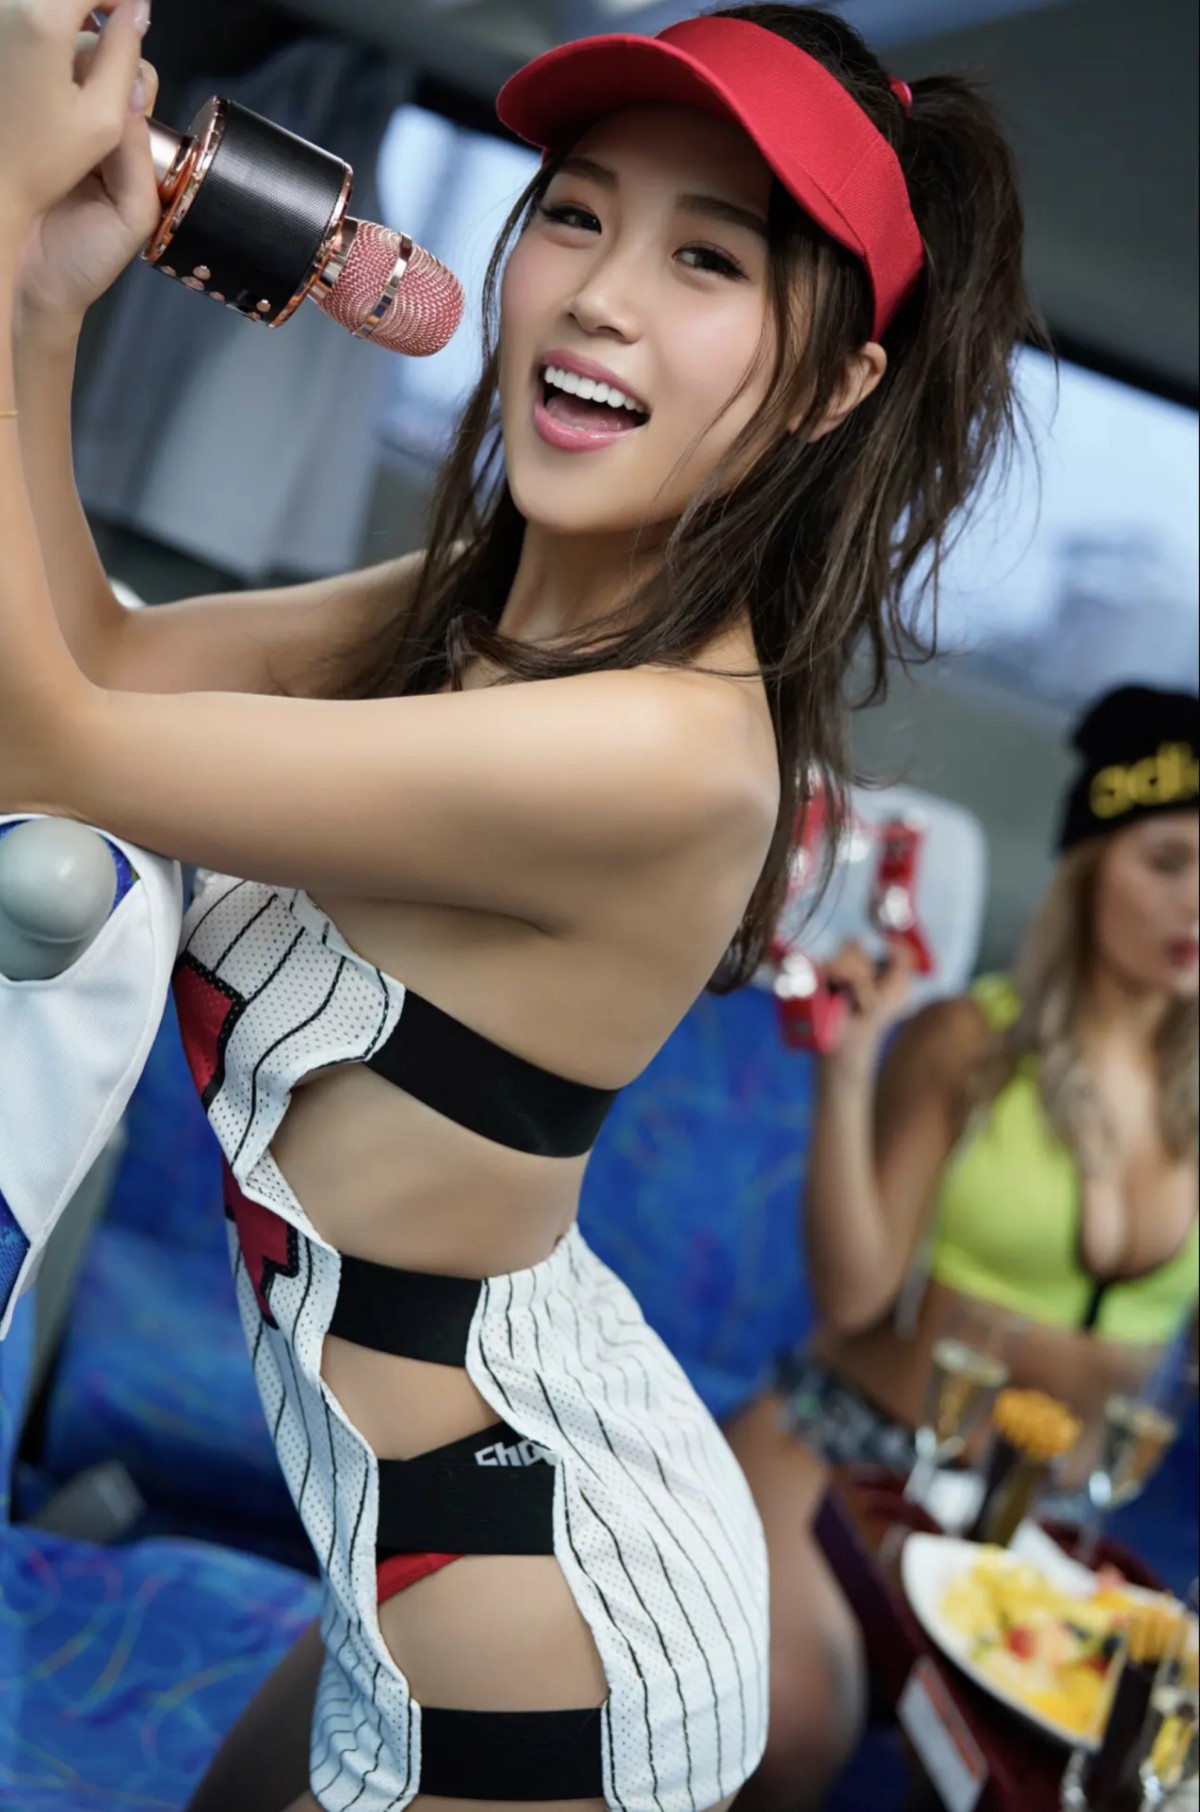 FRIDAYデジタル写真集 Cyber Japan Dancers Onsen Bus Tour Vol 1 With You 0003 3003610925.jpg